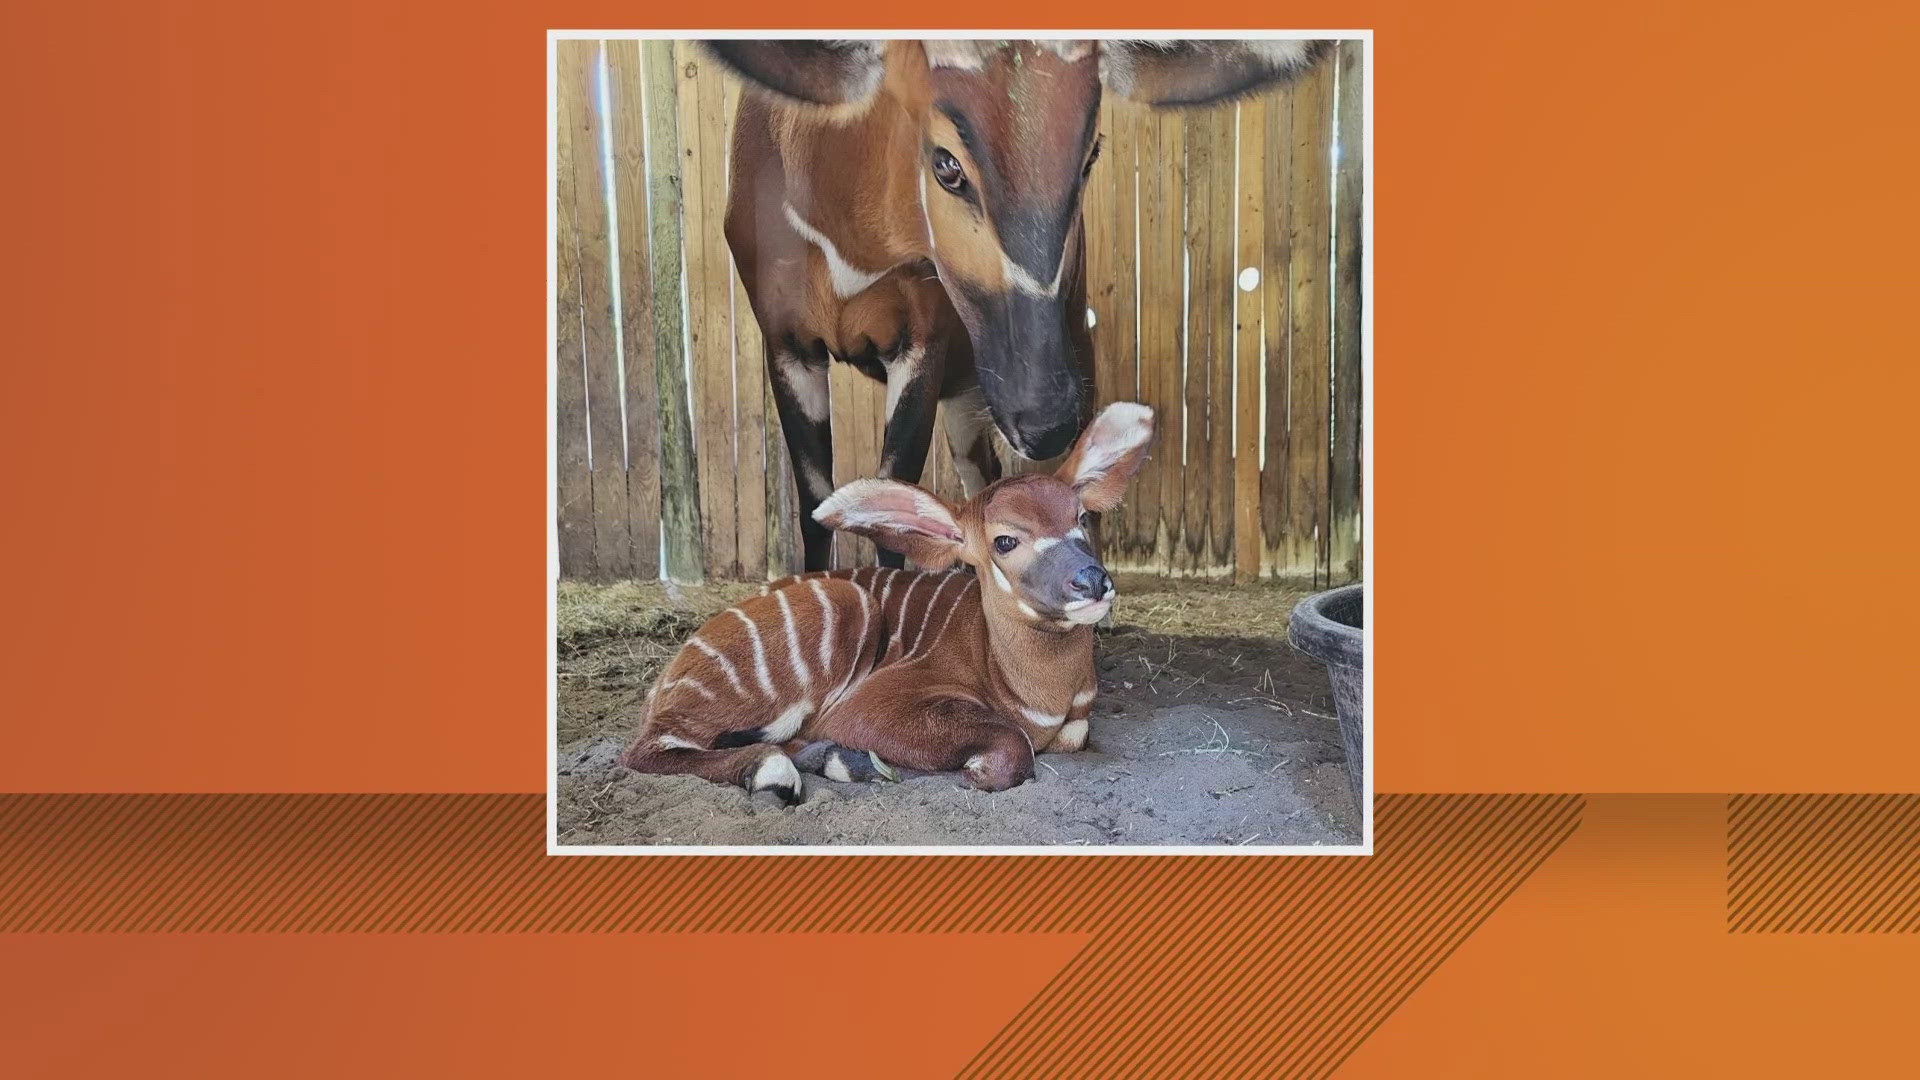 The zoo says the calf was born April 20 to parents Shimba (mom) & Mickey (dad). It will be "out on habitat as much as possible over the next few weeks," the zoo said